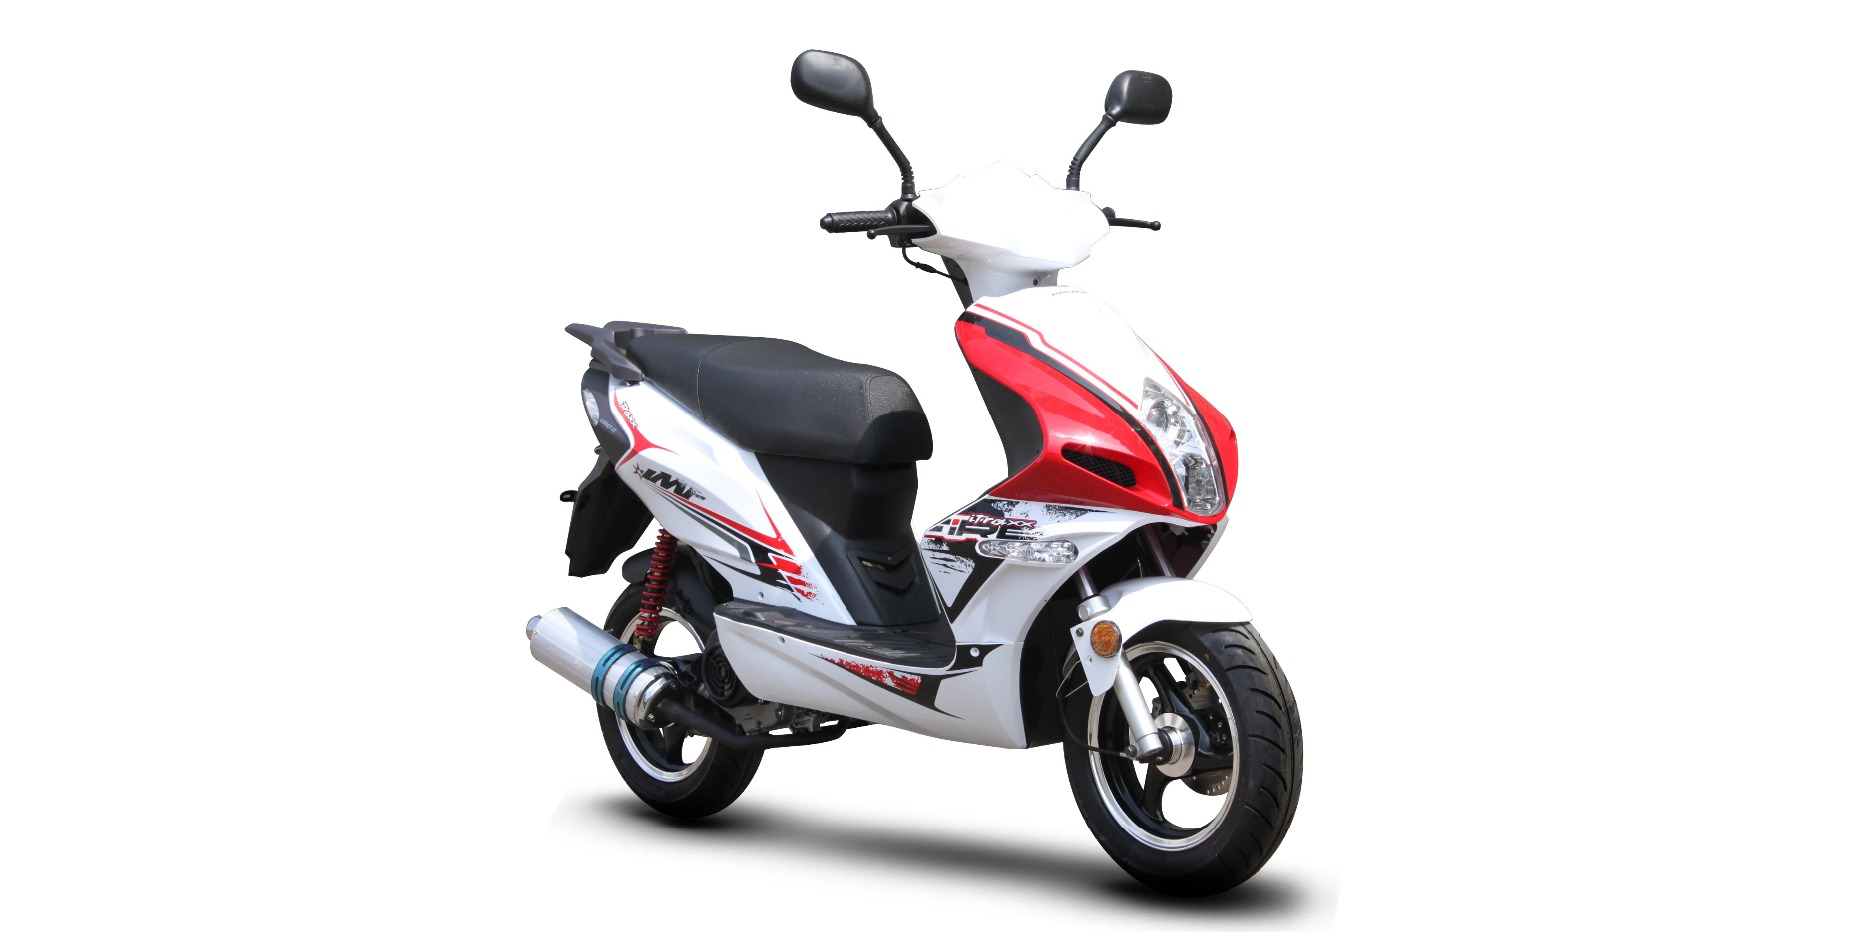 Why You Should Choose a Quality Gas Scooter